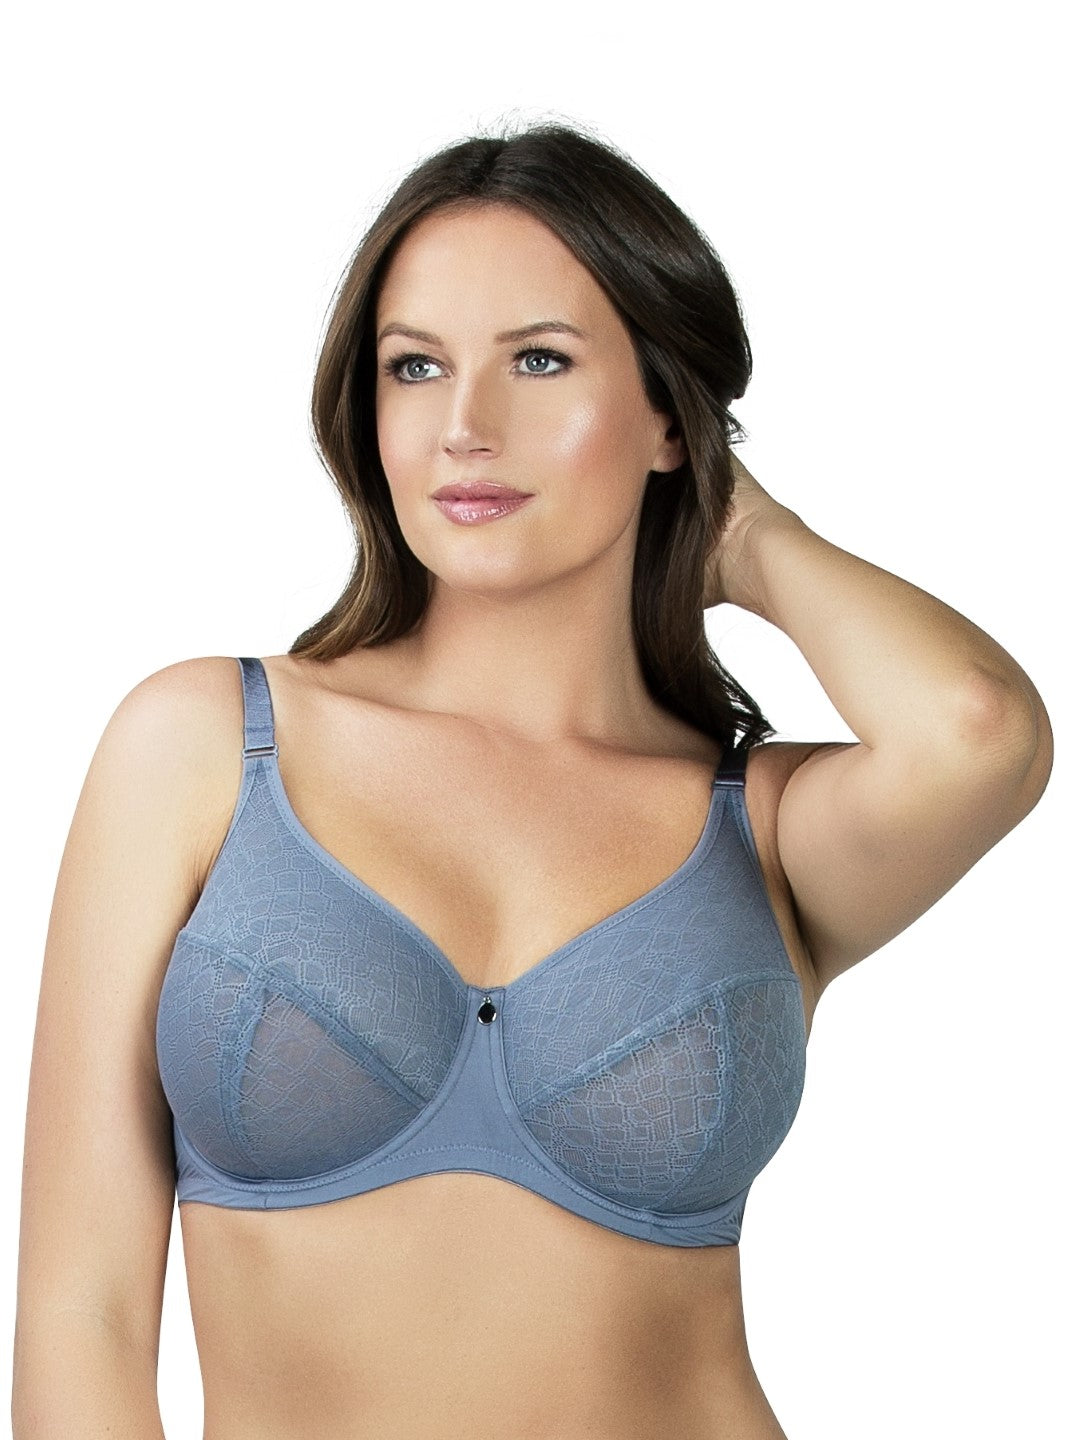 Nati showing us why she loves her Enora Minimizer Bra